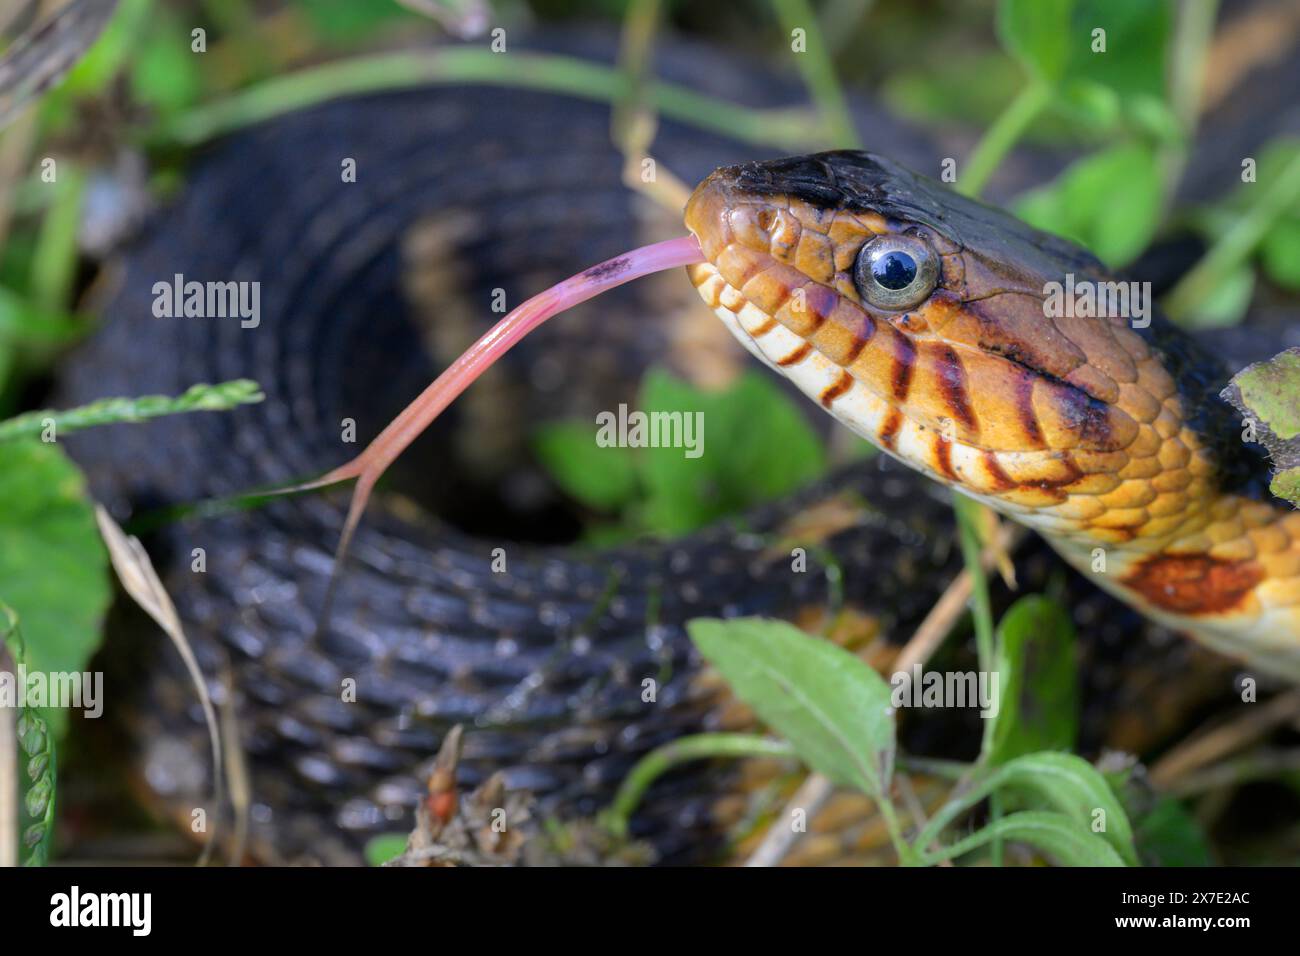 Banded water snake or southern water snake (Nerodia fasciata) with tongue extended, Brazos Bend State Park, Texas, USA. Stock Photo